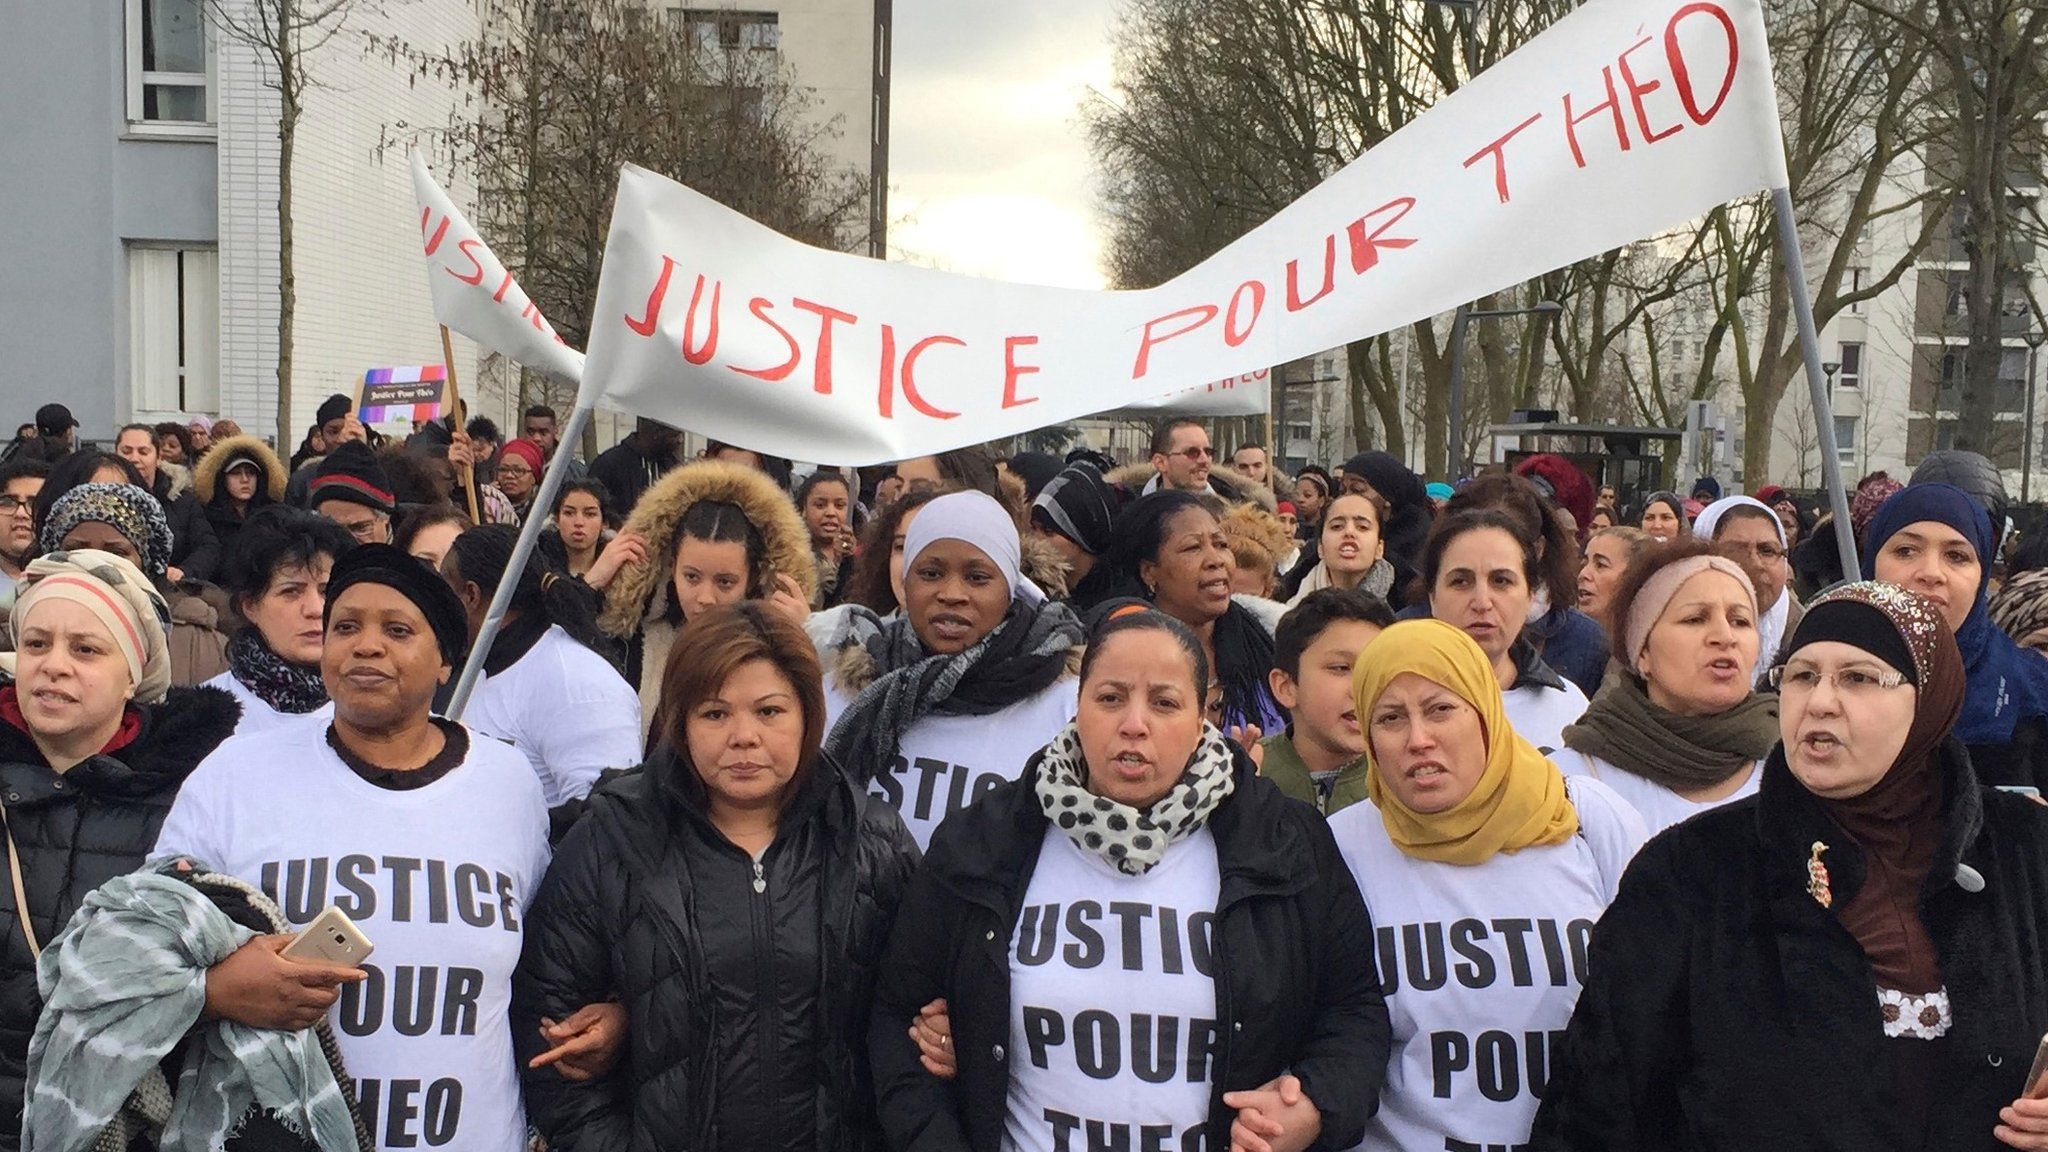 People march in the streets of Aulnay-sous-Bois, north of Paris, France, holding a sign reading "Justice for Theo" during a protest, a day after a French police officer was charged with the rape of a youth, 6 February 2017